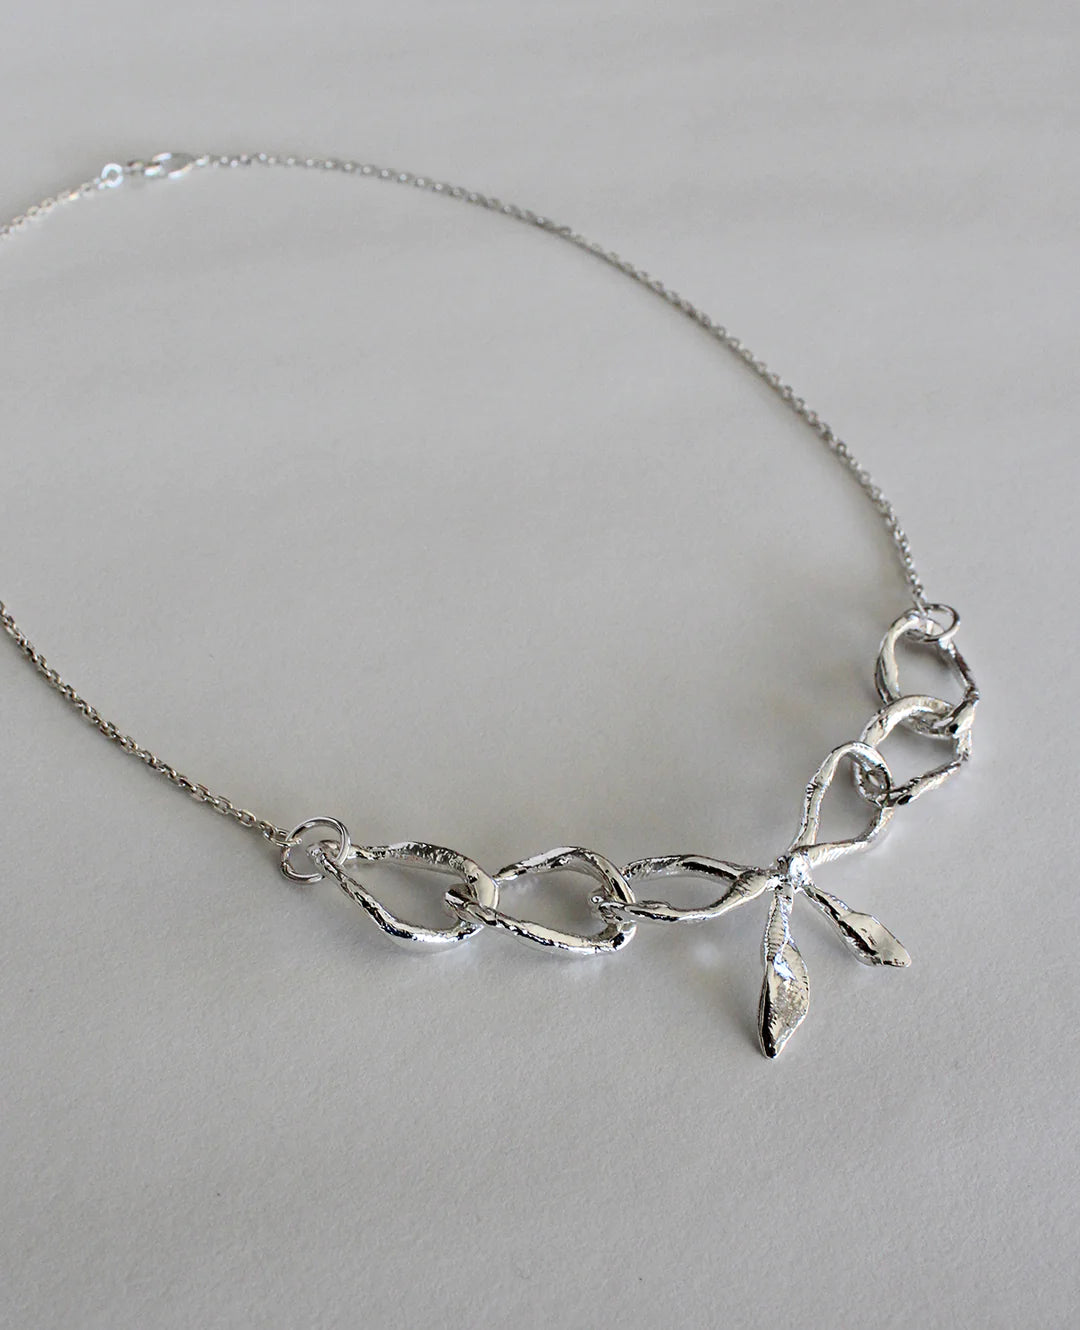 BOW REALIS // silver necklace